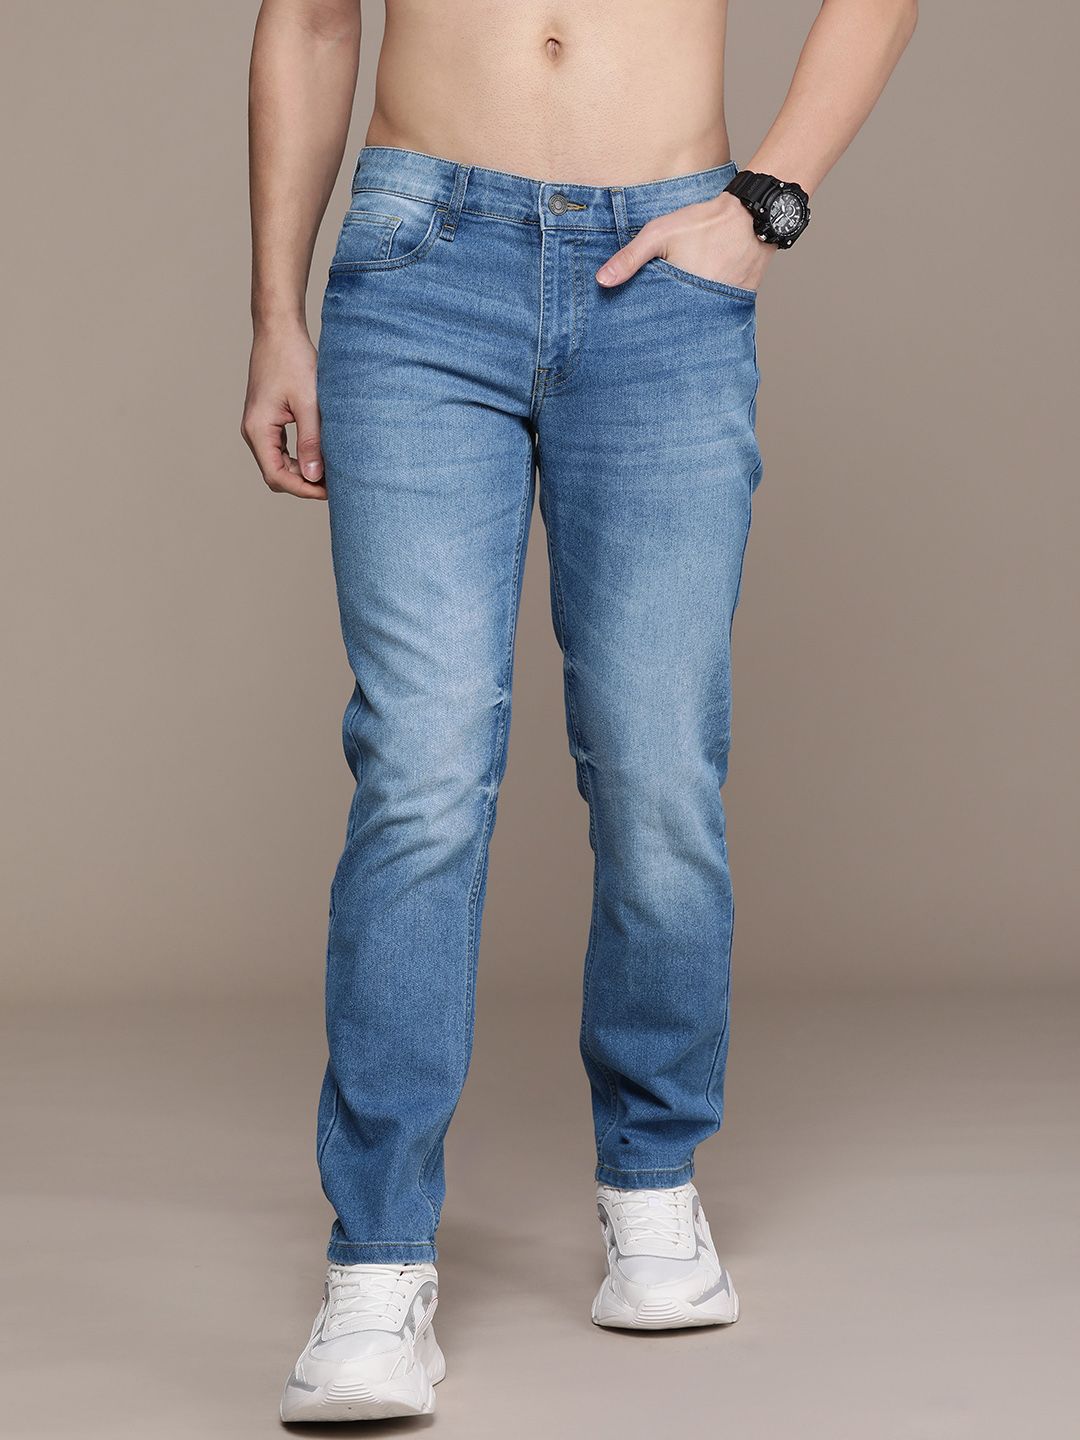 Roadster Men Slim Fit Heavy Fade Stretchable Jeans